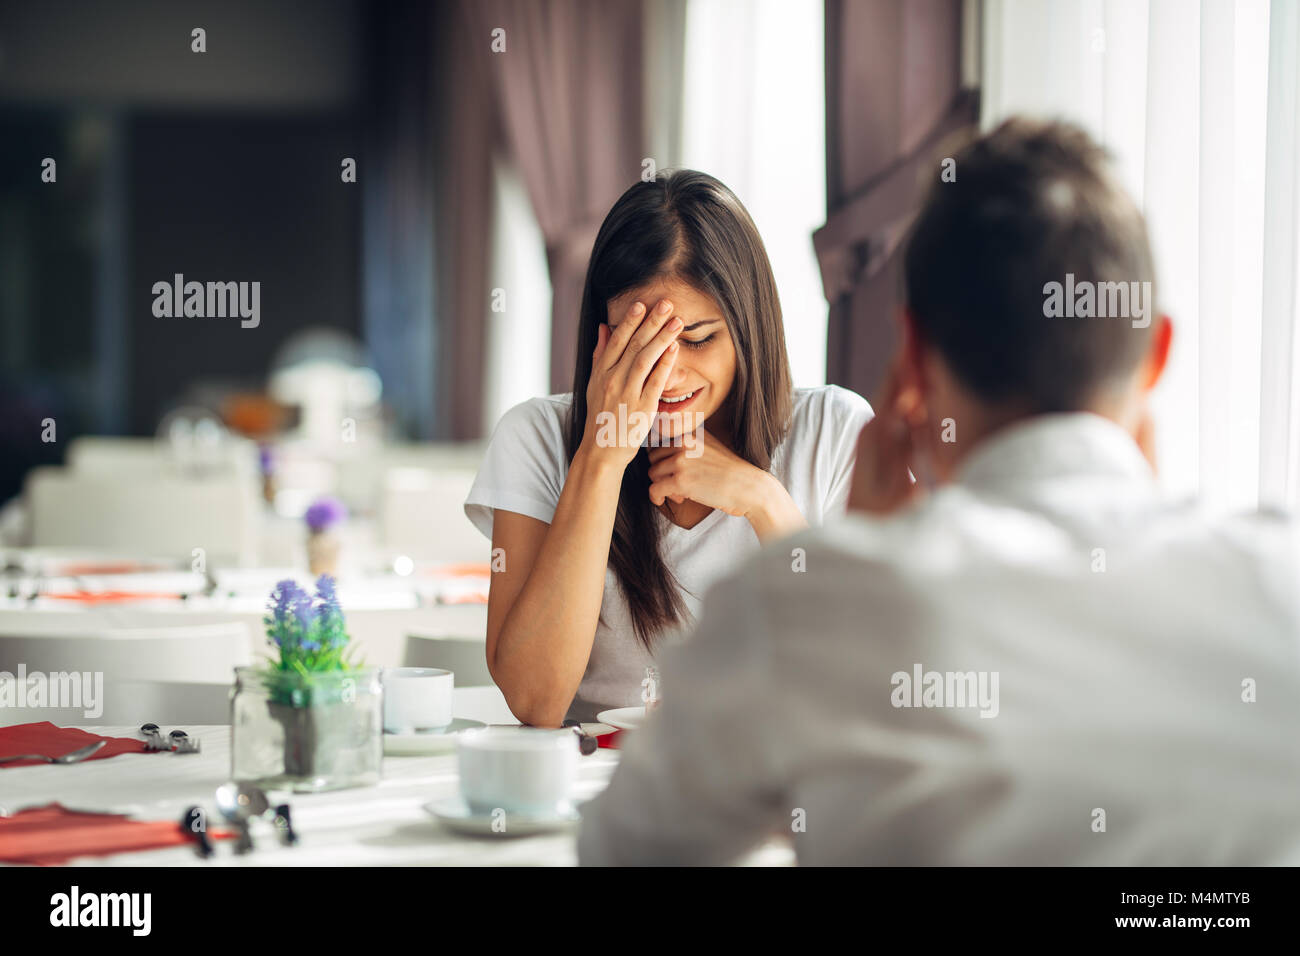 Crying stressed woman reaction to negative event,handling bad news.Breaking up long relationship.Emotional woman in grief,emotional pain.Couple fighti Stock Photo